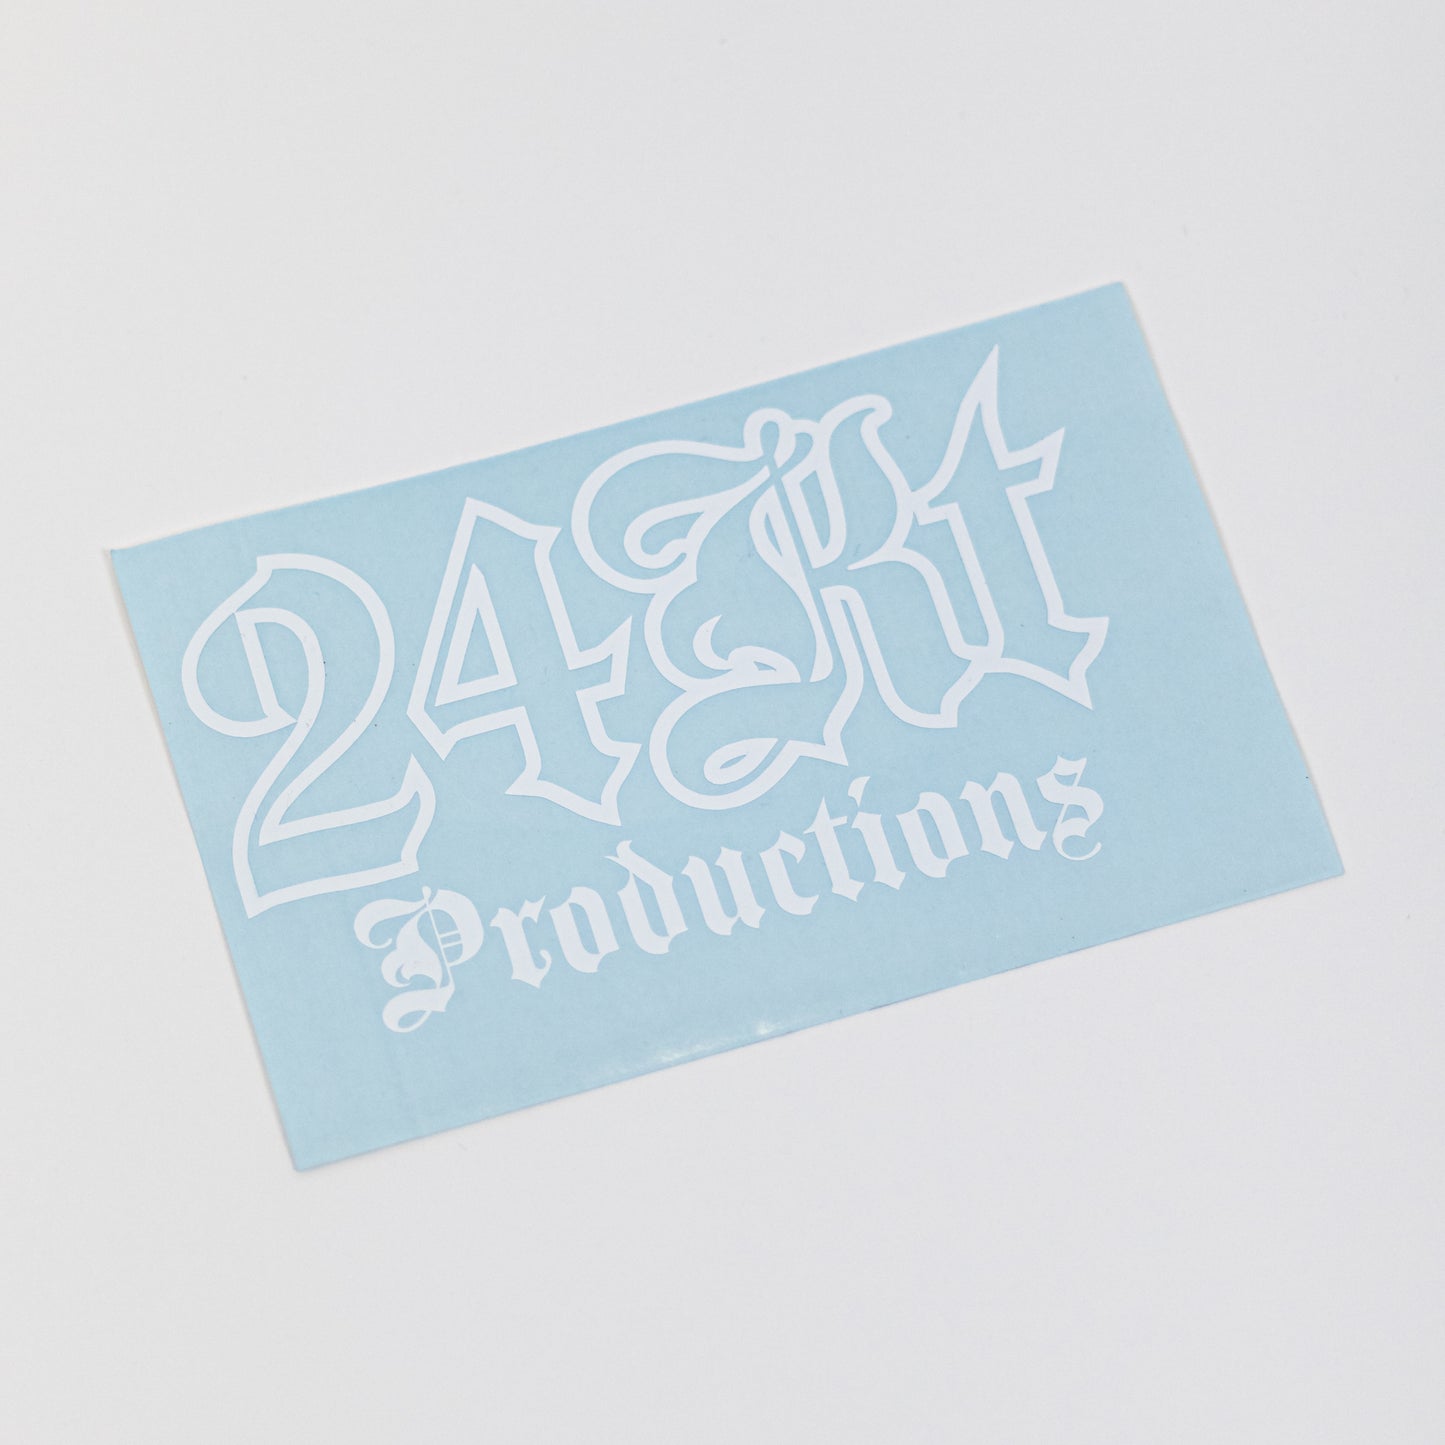 24Kt Decal (White)